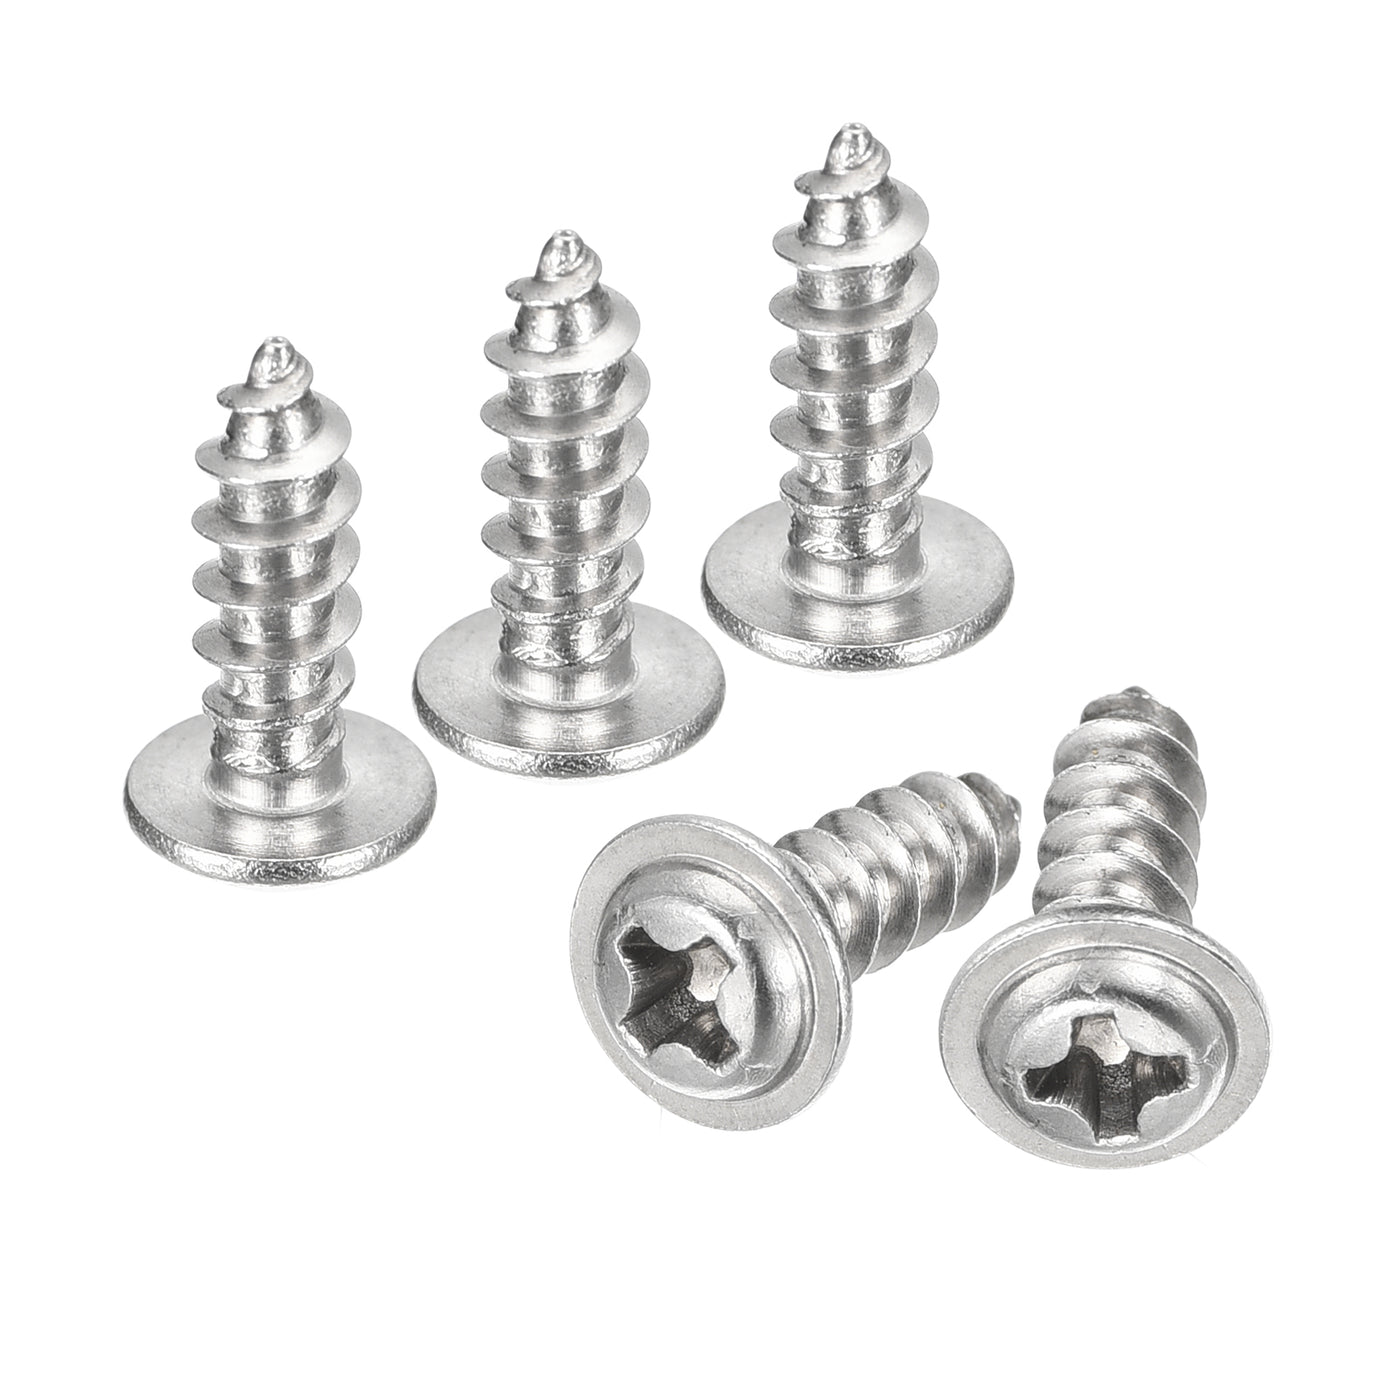 uxcell Uxcell ST4x12mm Phillips Pan Head Self-tapping Screw with Washer, 100pcs - 304 Stainless Steel Wood Screw Full Thread (Silver)